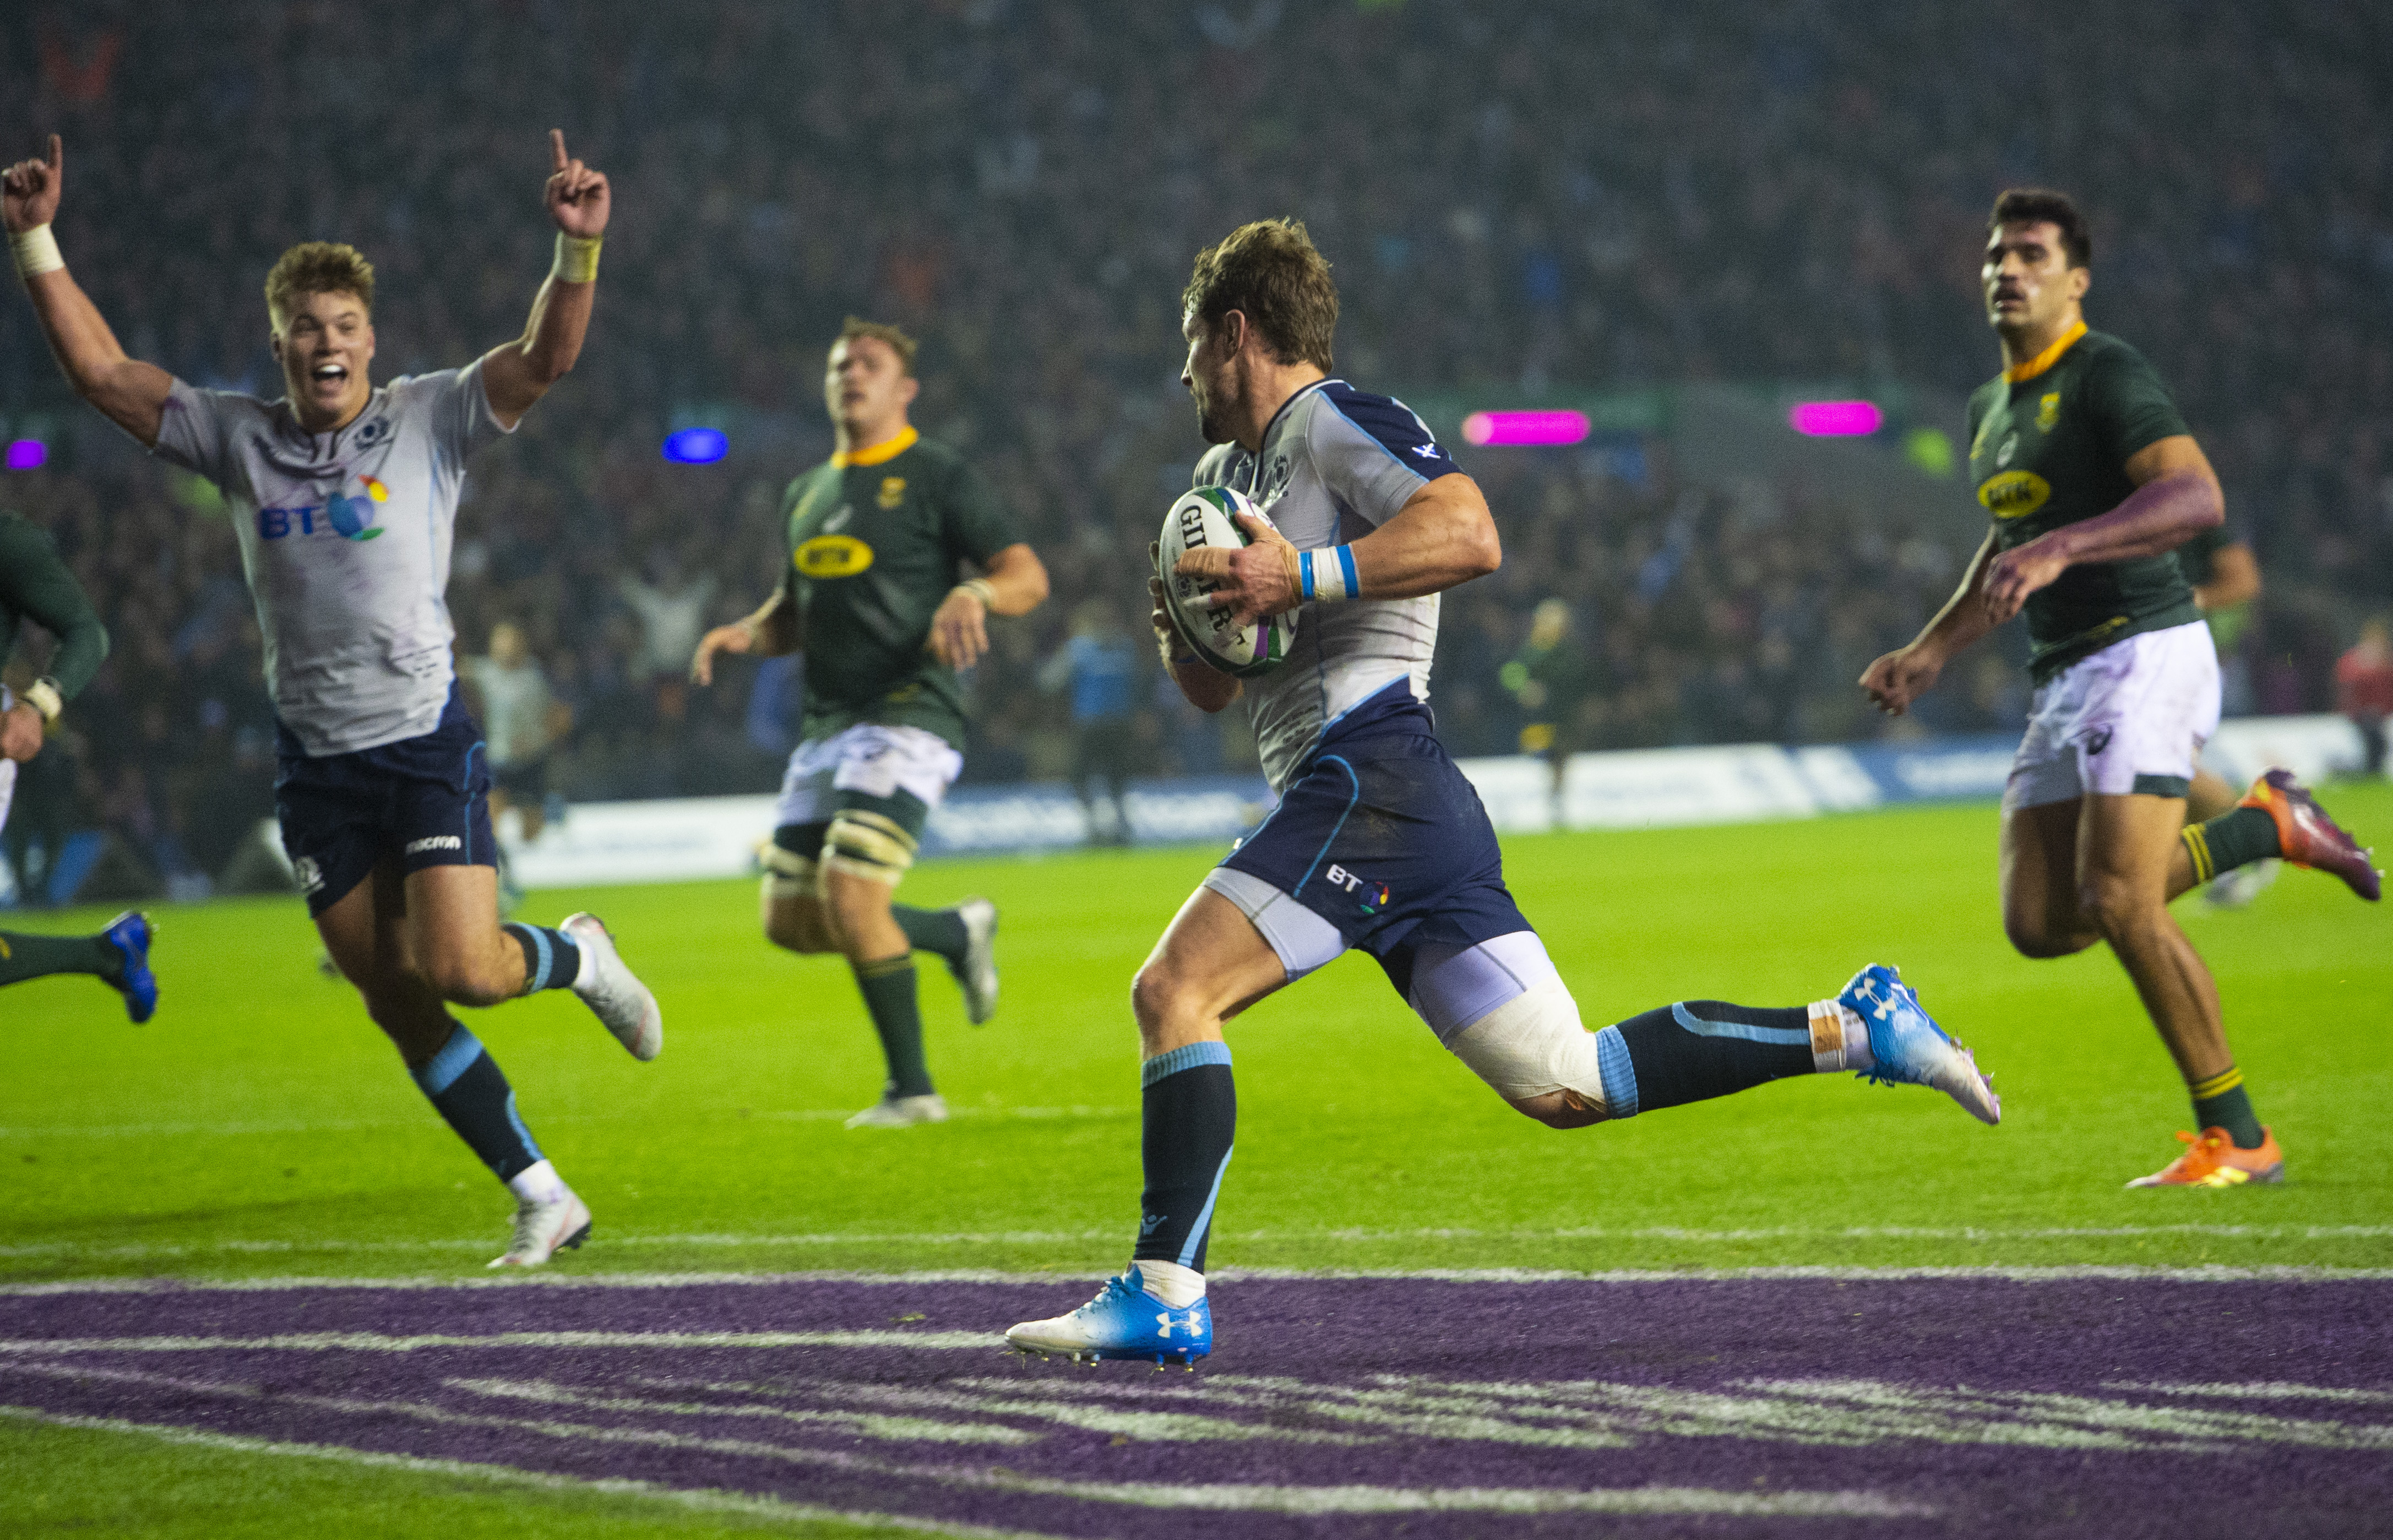 Scotland surrendered points to South Africa too quickly in the wake of Peter Horne's spectacular first half try.